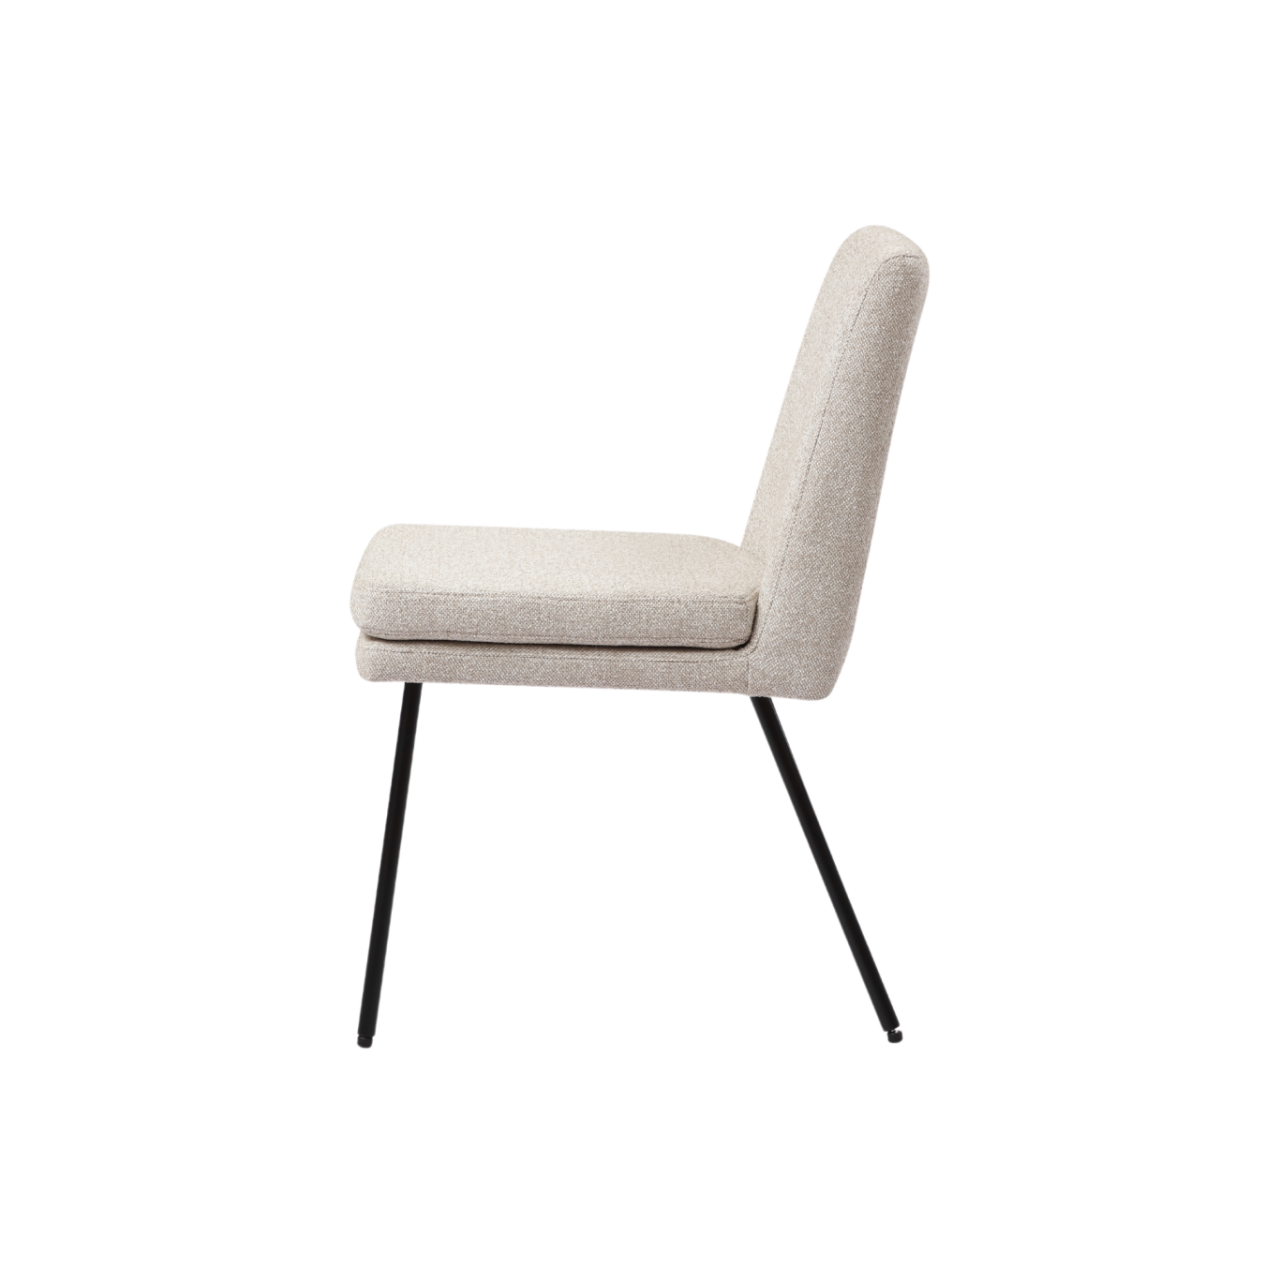 side view of comfortable, fully upholstered minimal dining chair in mink flat weave fabric